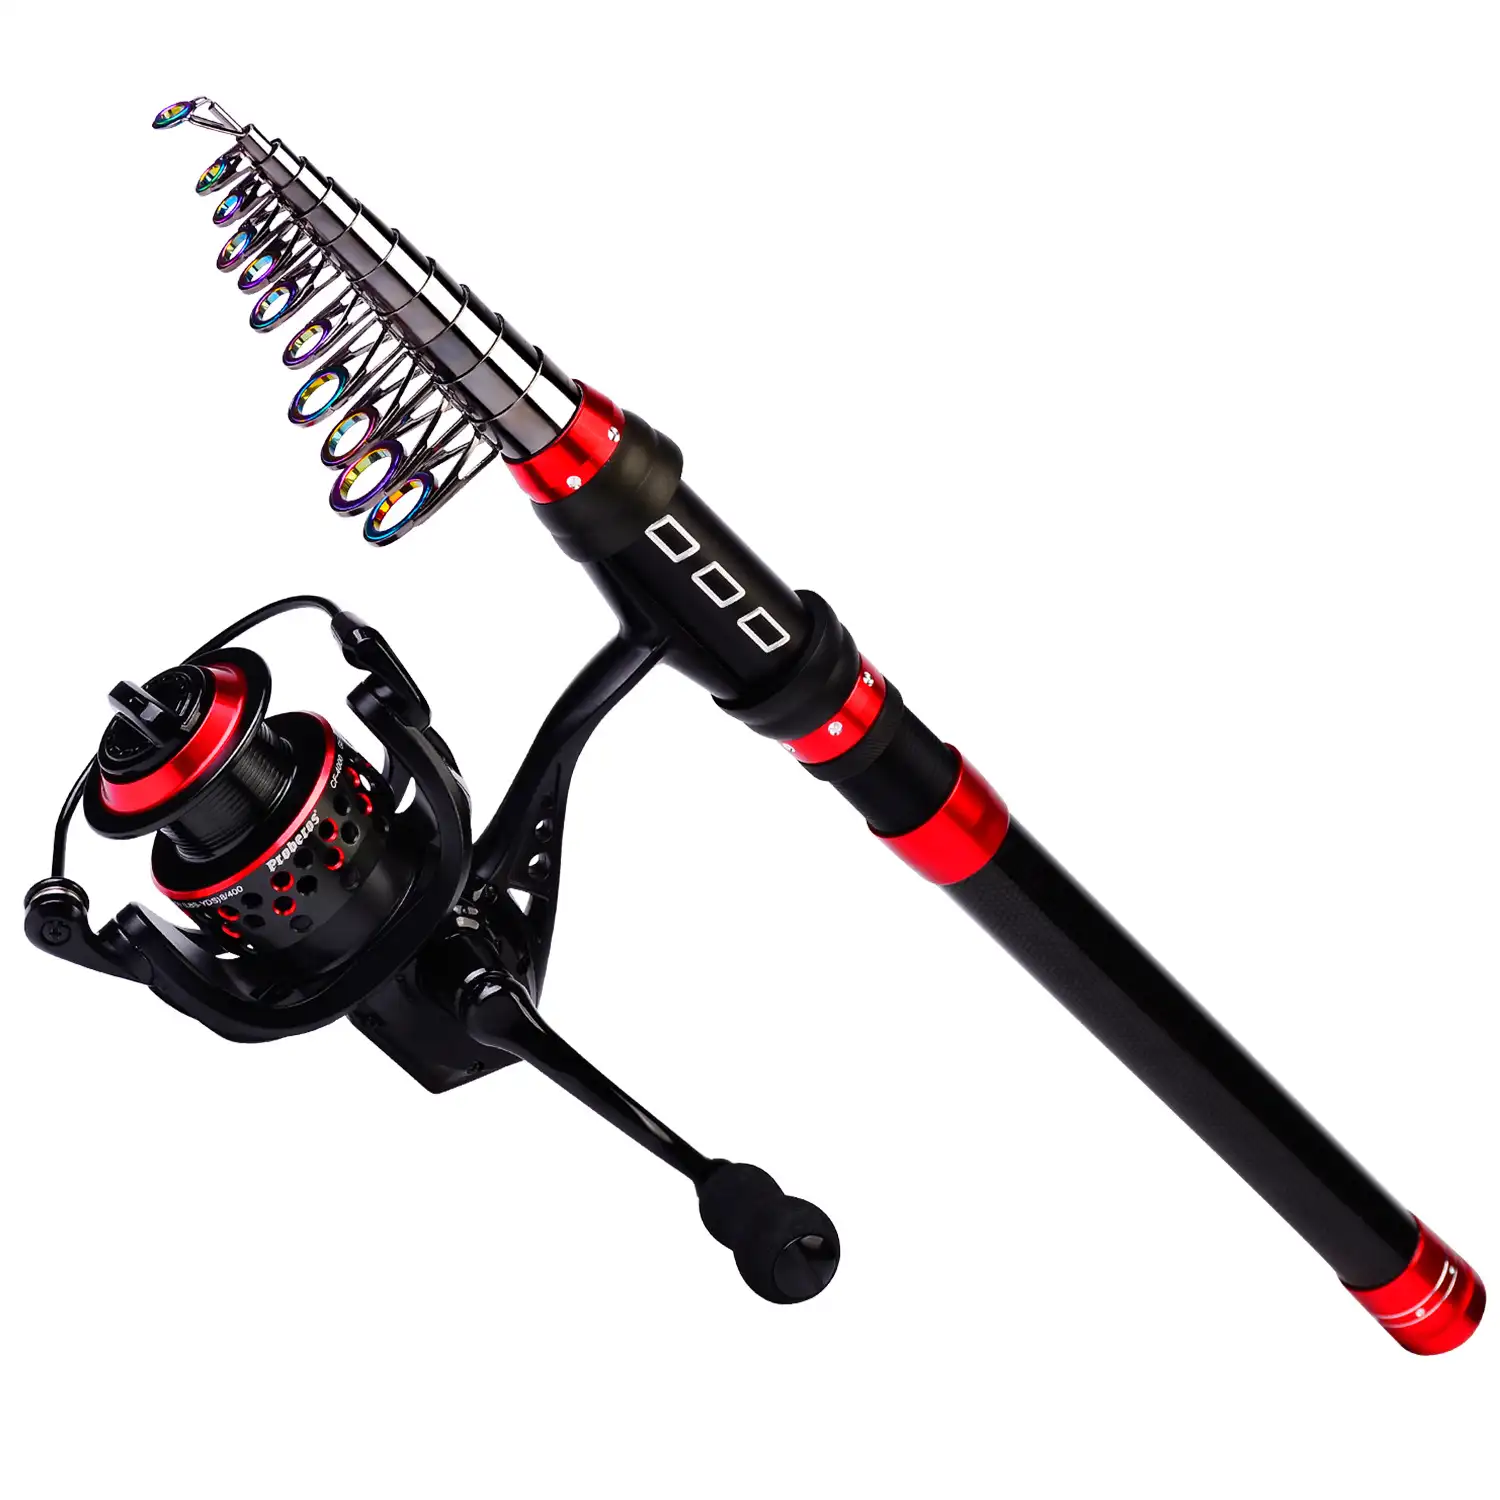 2022 New 1.8m 2.1m 2.4m 2.7m 3.0m 3.6m Carbon Fishing Rod Telescopic Rock Fishing Rod For Saltwater And Freshwater